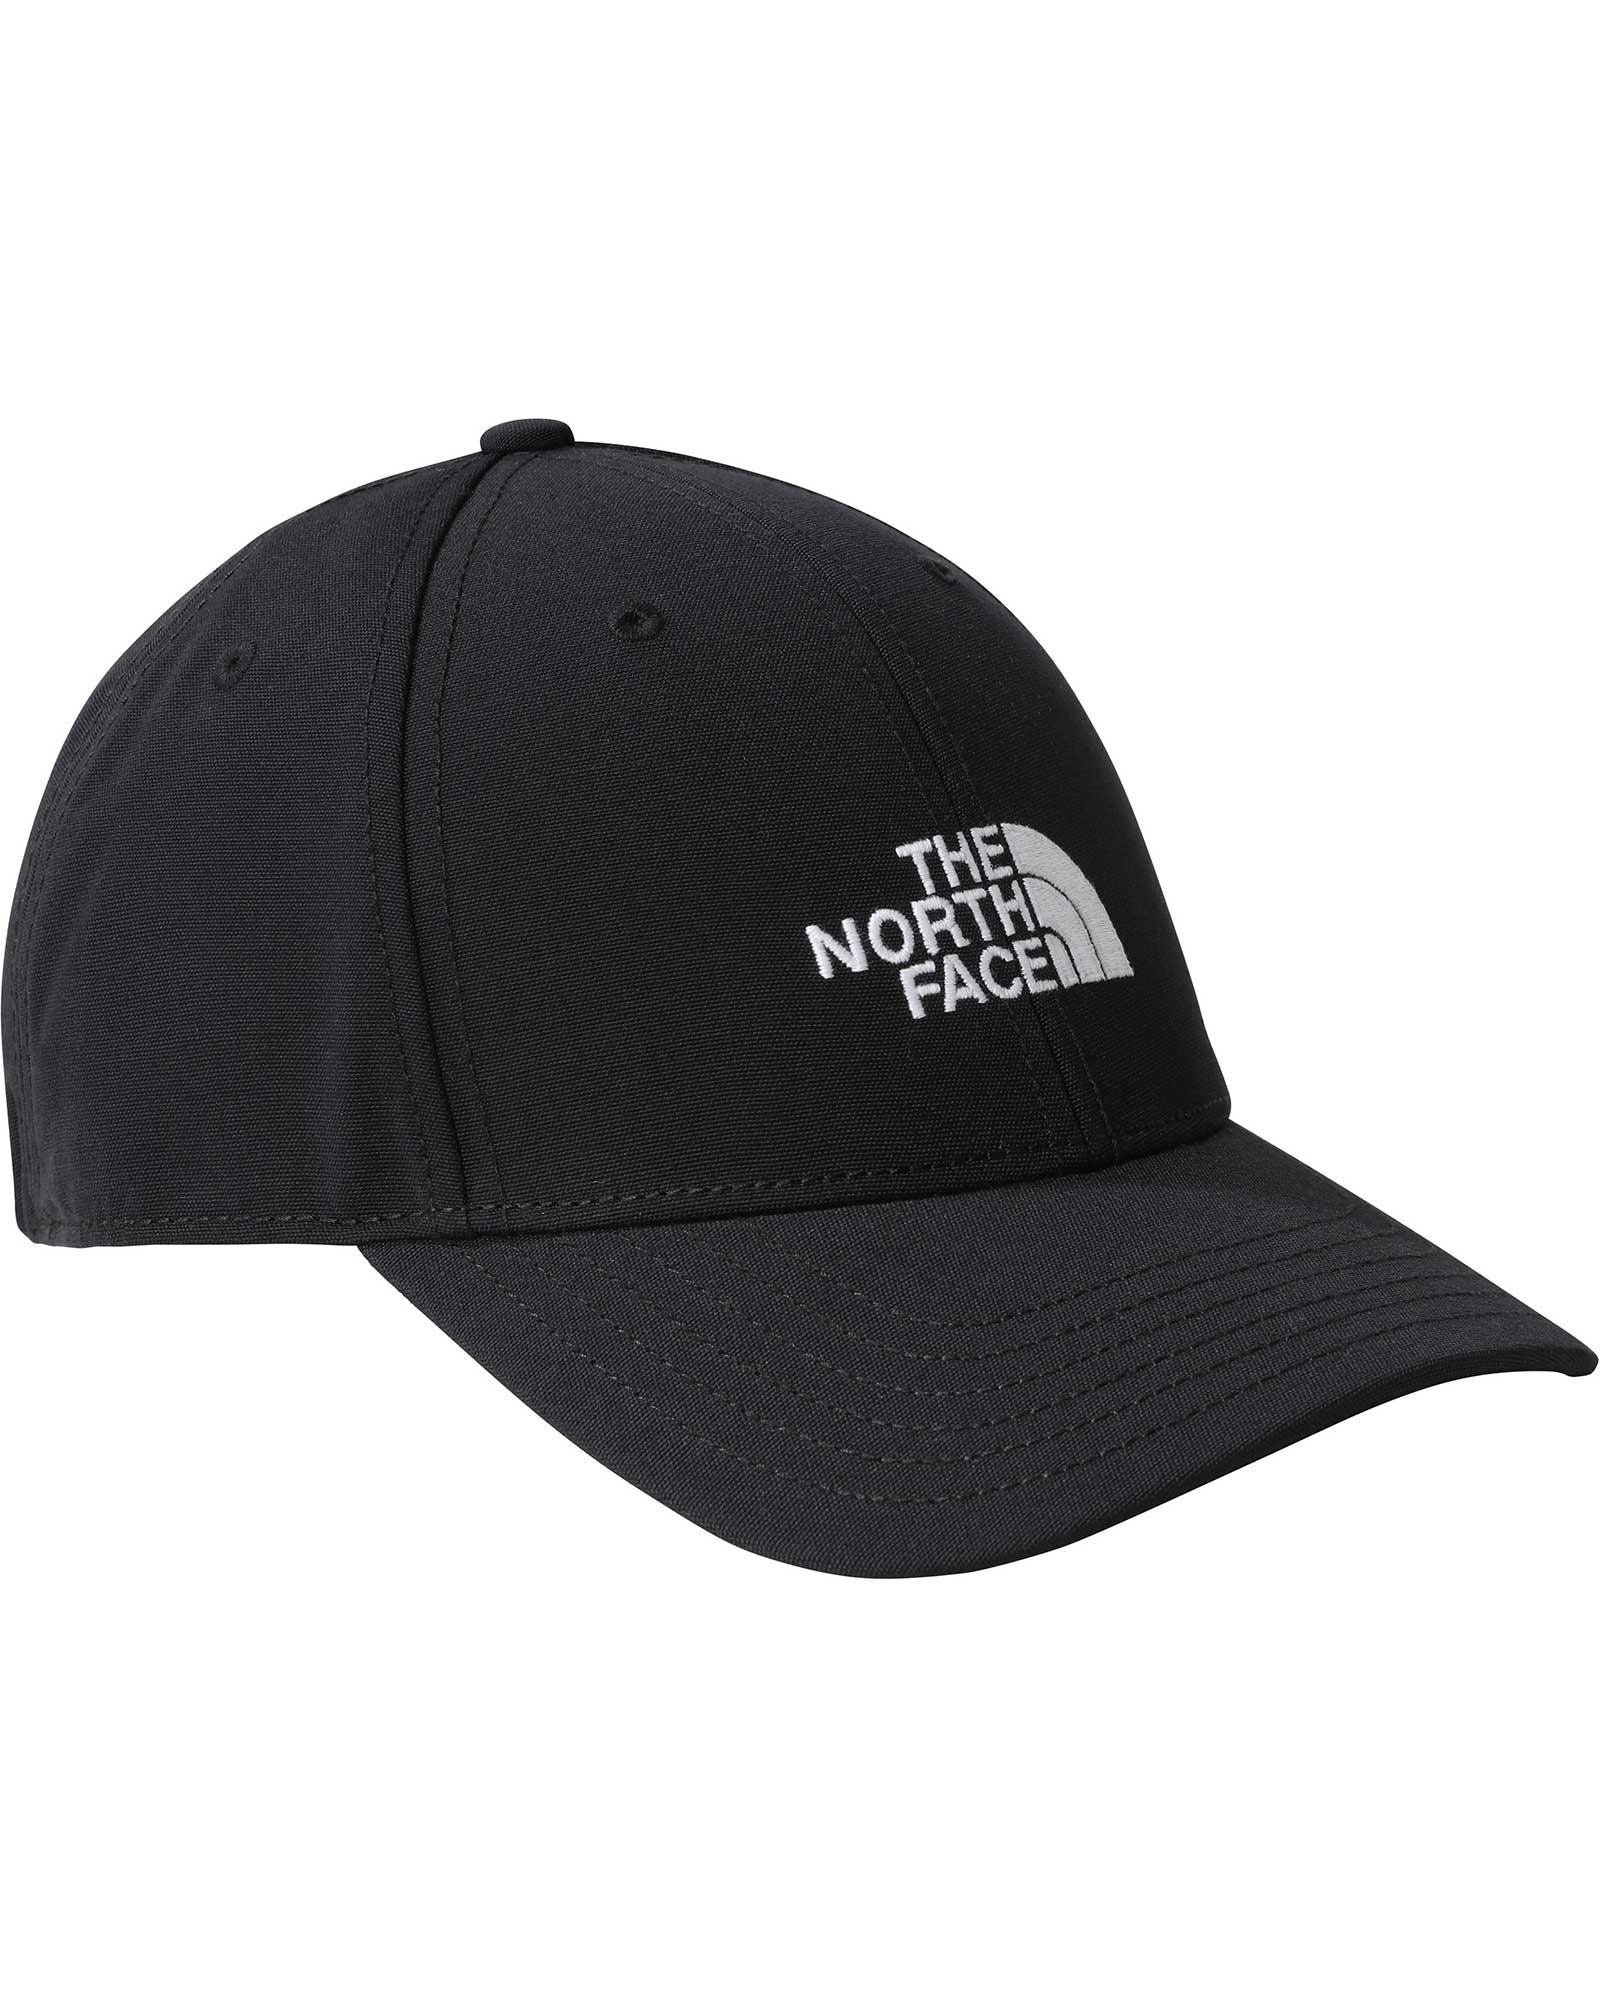 The North Face Classic Recycled 66 Kids’ Hat - TNF Black